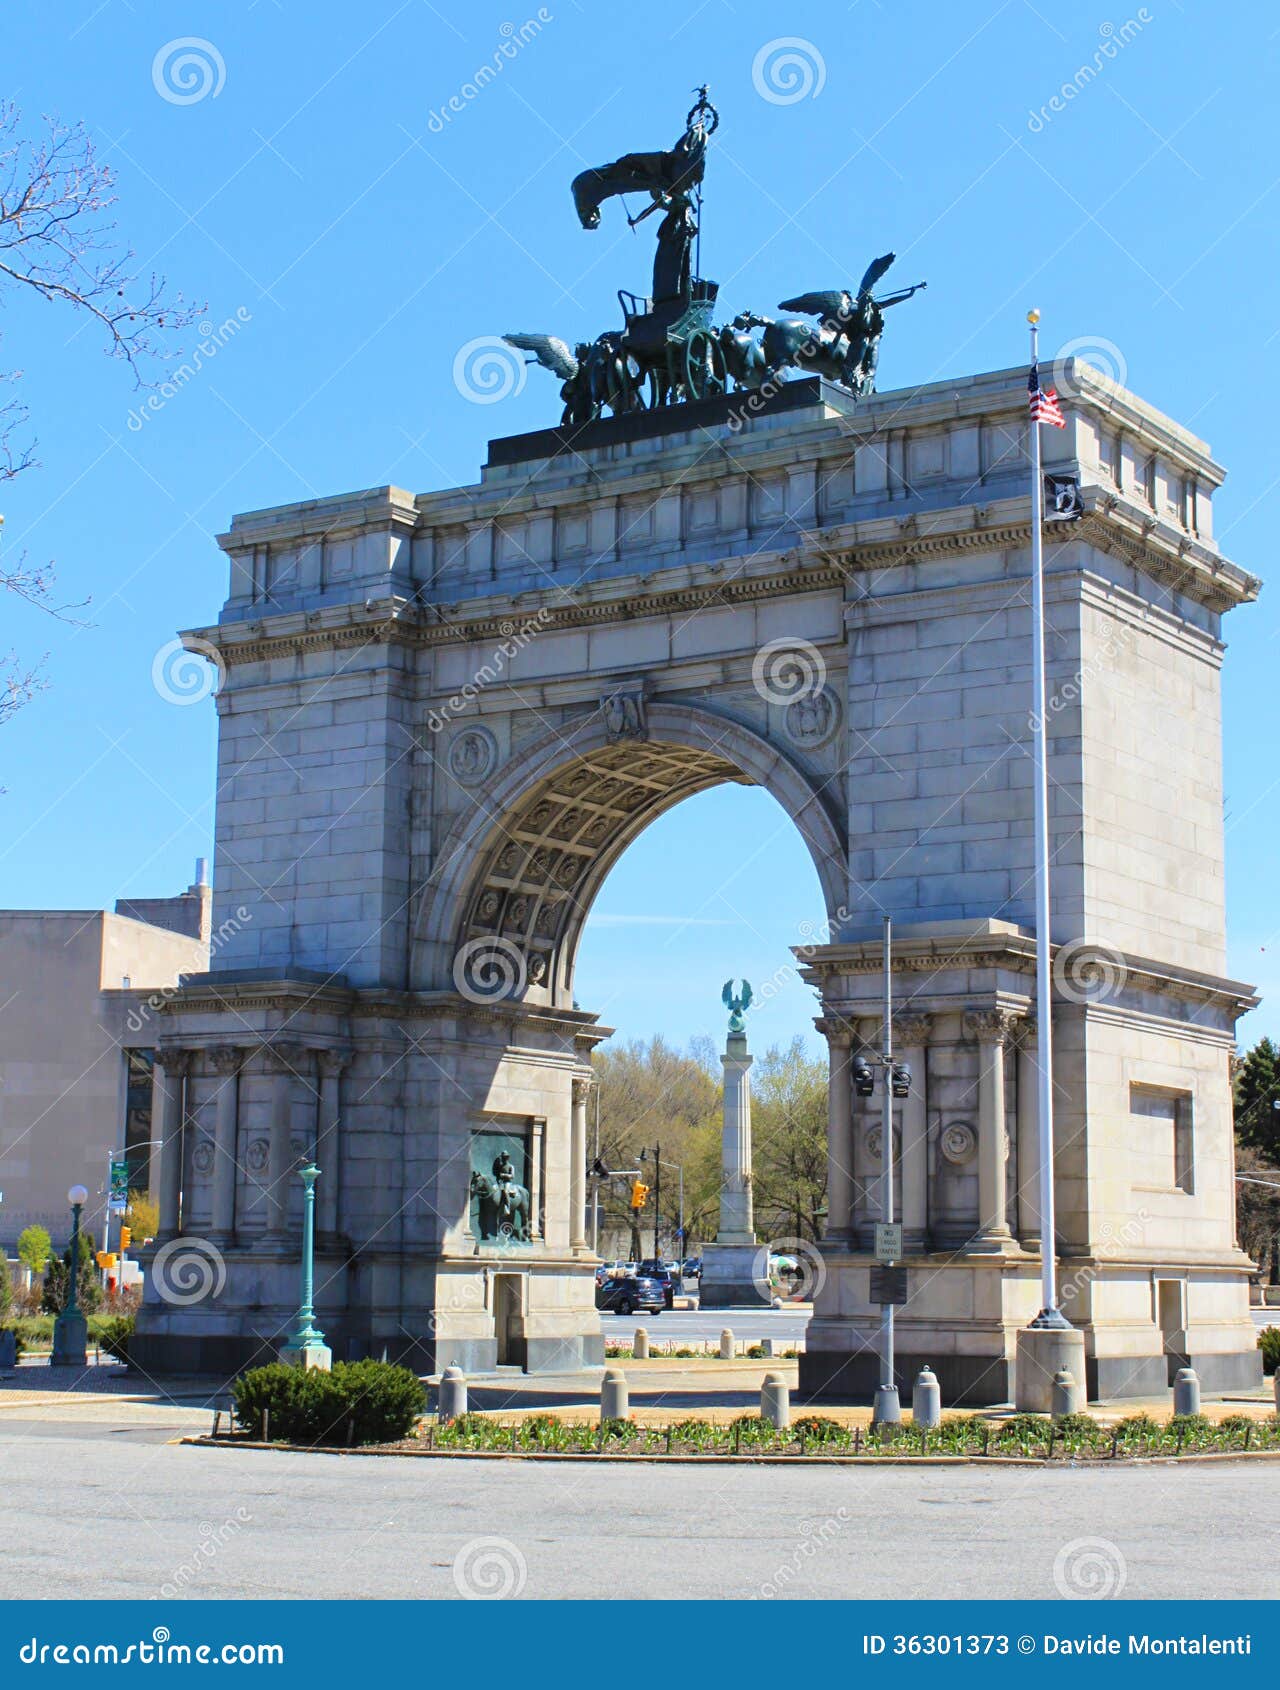 soldiers' and sailors' arch - new york city